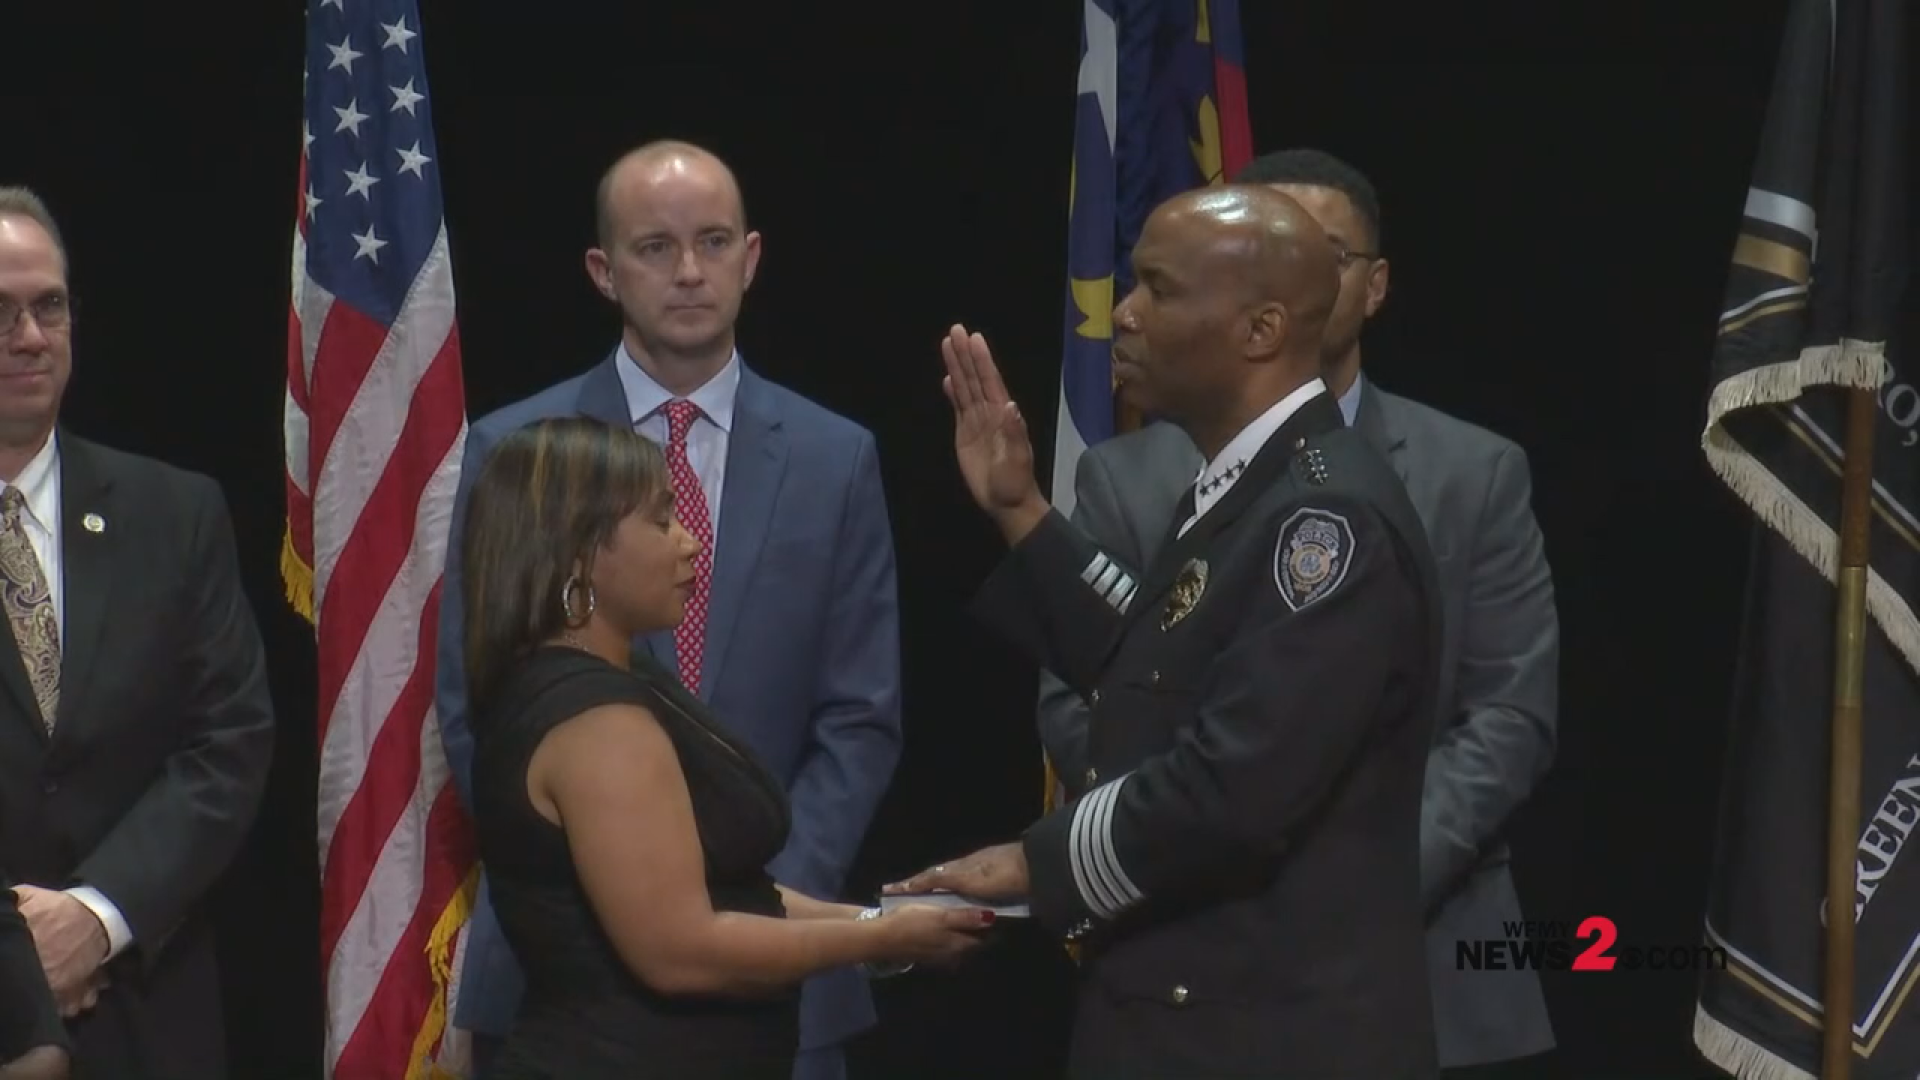 Brian James, a veteran of the Greensboro Police Department, took his oath of office on January 31, 2020.